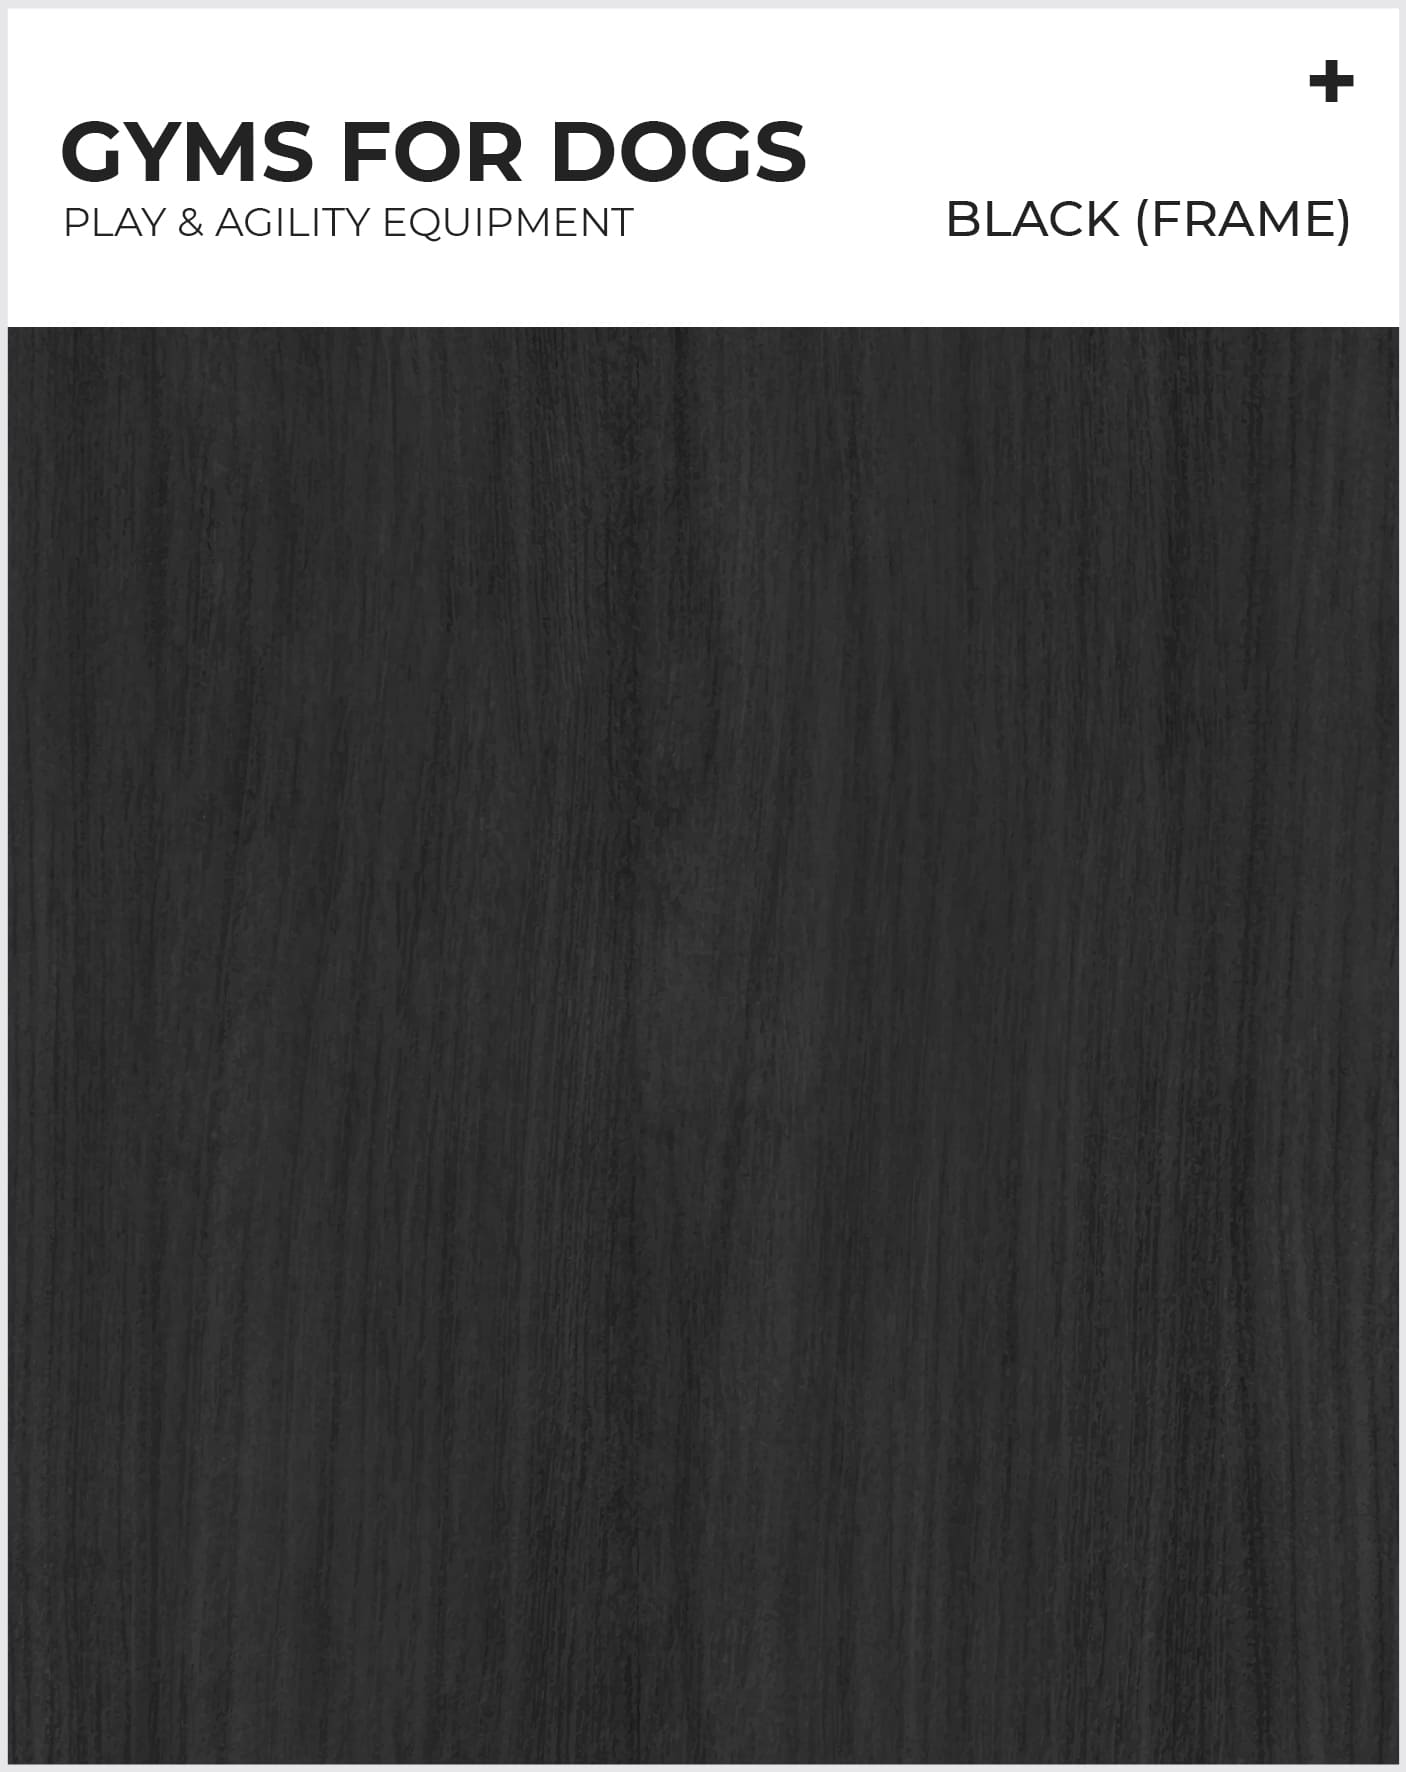 Dog Park Equipment Agility Products - Black